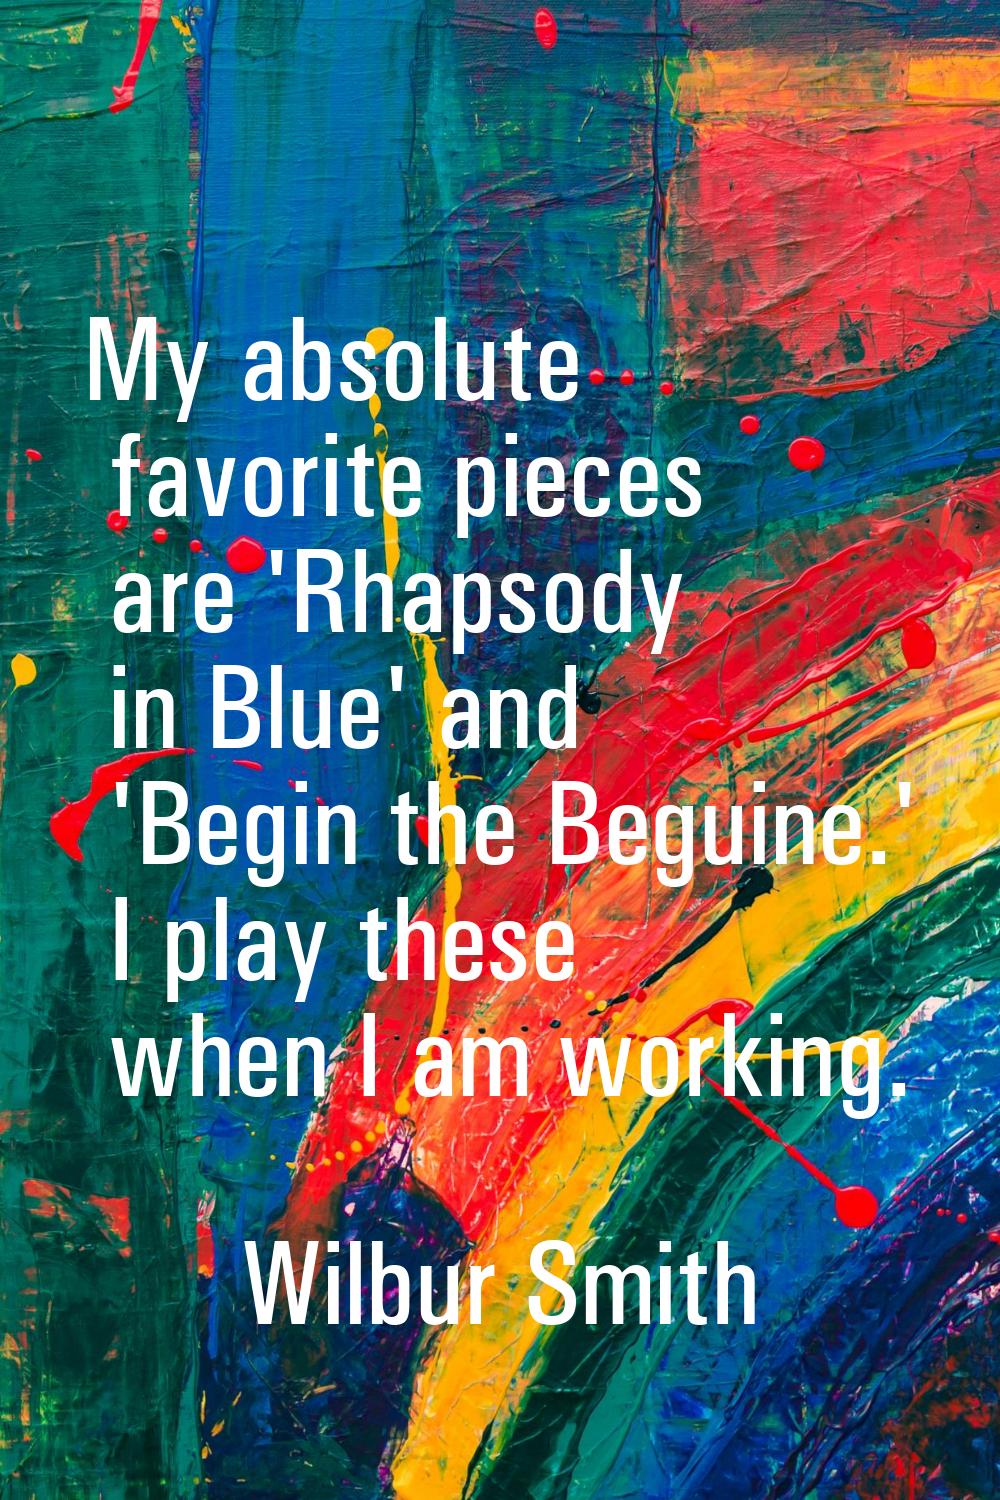 My absolute favorite pieces are 'Rhapsody in Blue' and 'Begin the Beguine.' I play these when I am 